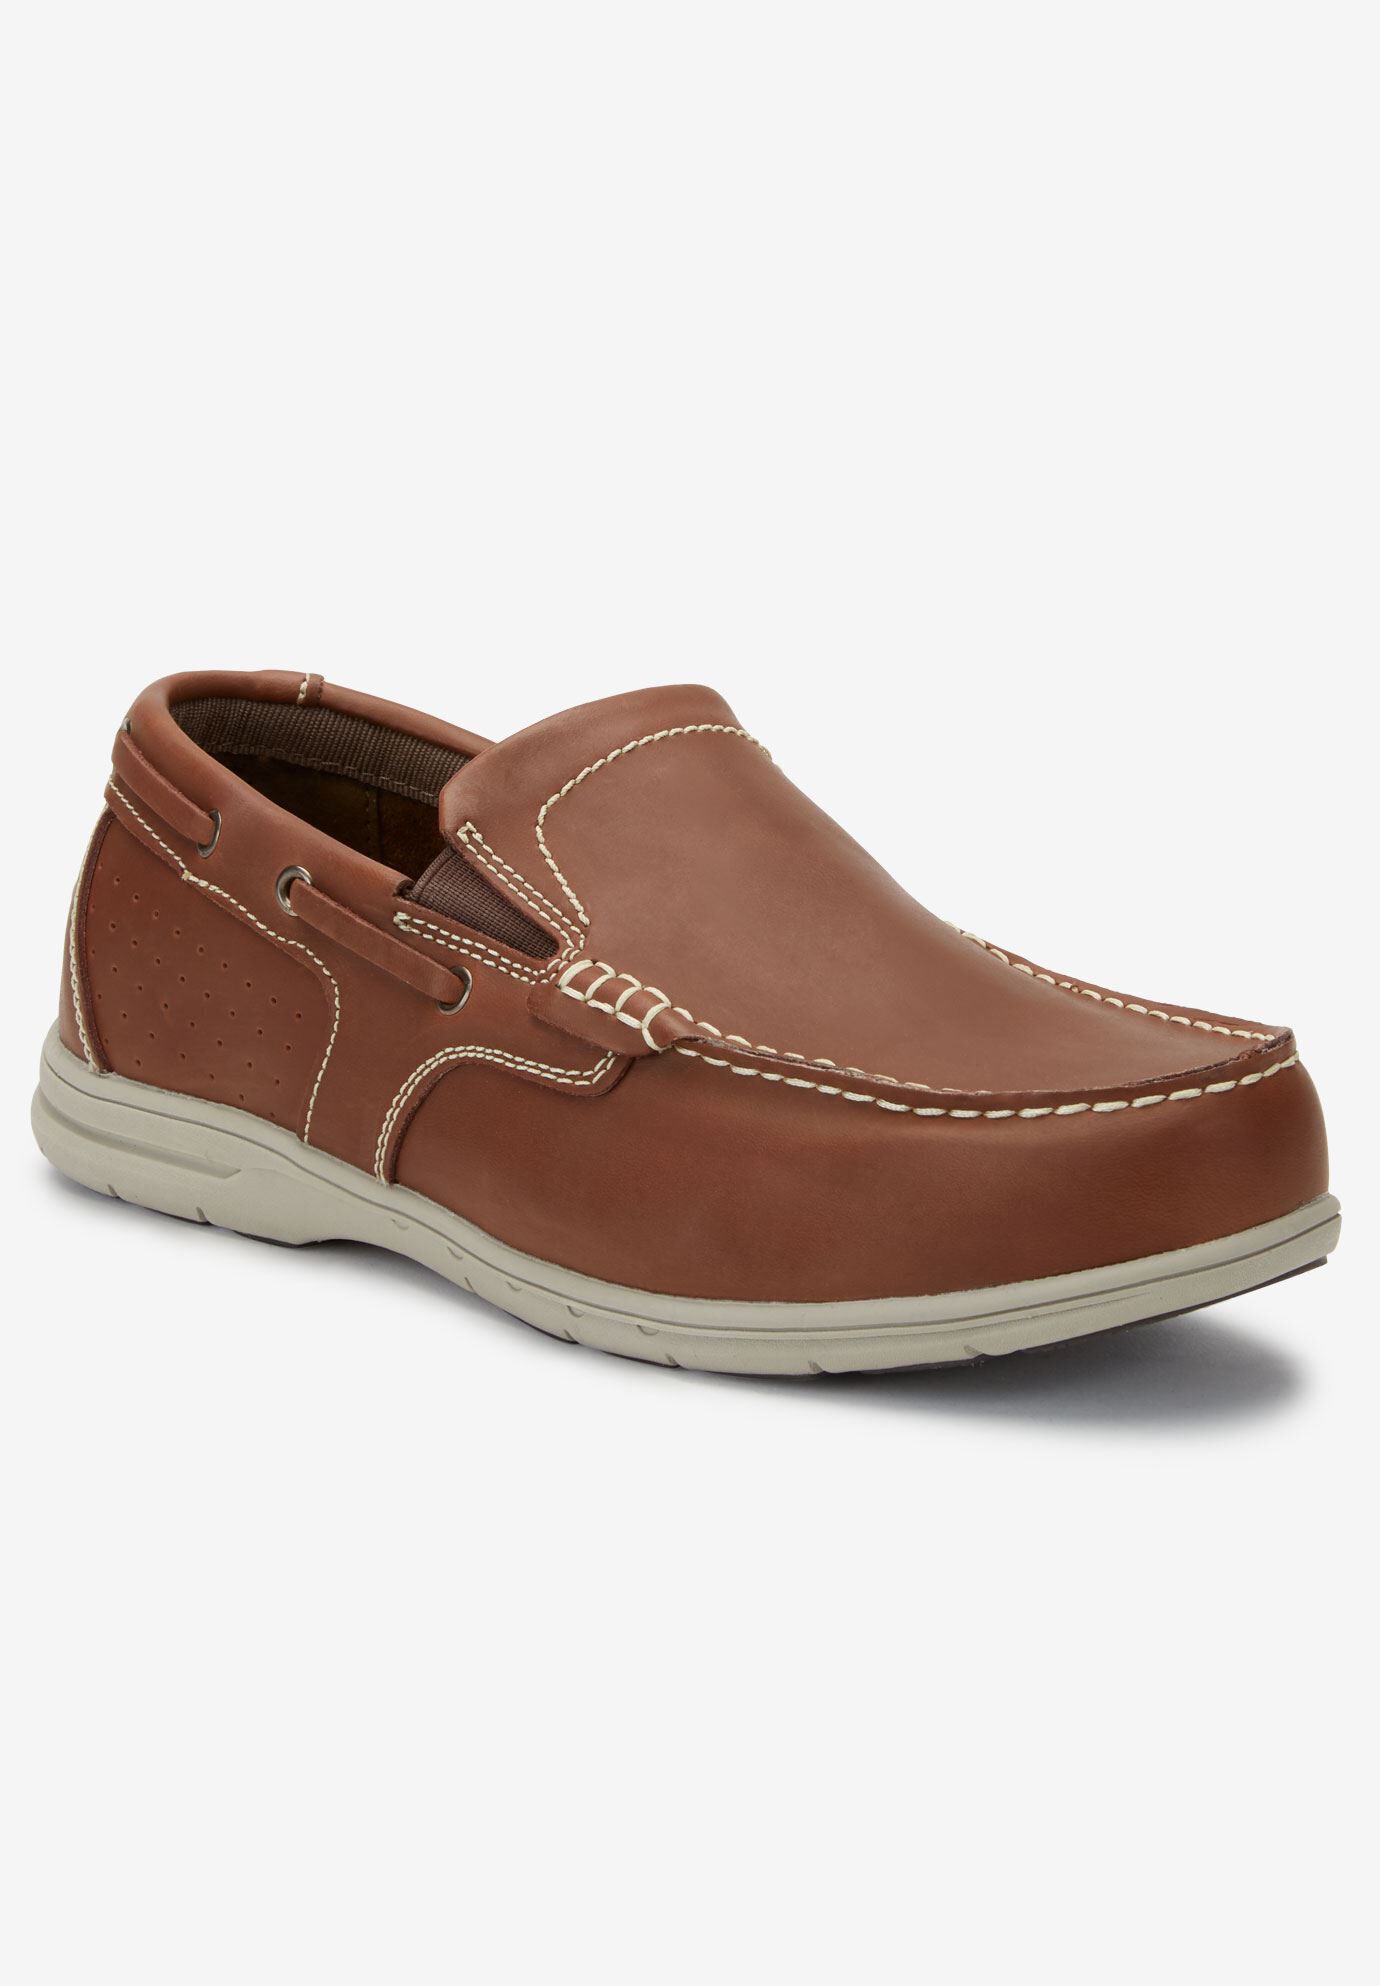 Slip-On Boat Shoes| Big and Tall Casual 